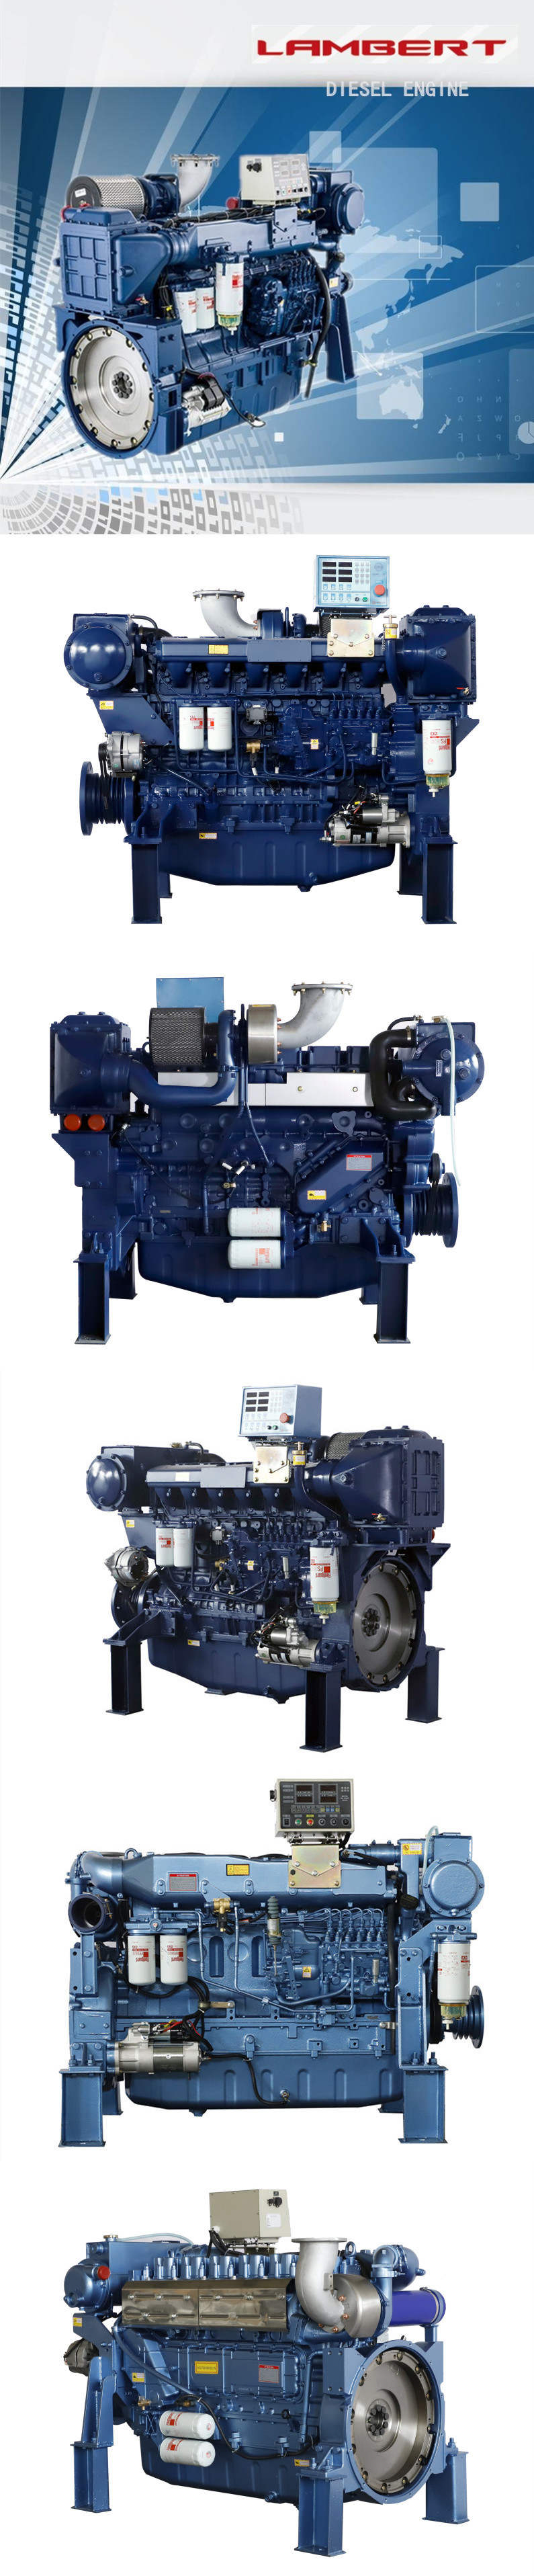 Hot Sale Brand New 6 Cylinders Water Cooled Boat Engine Marine Engine